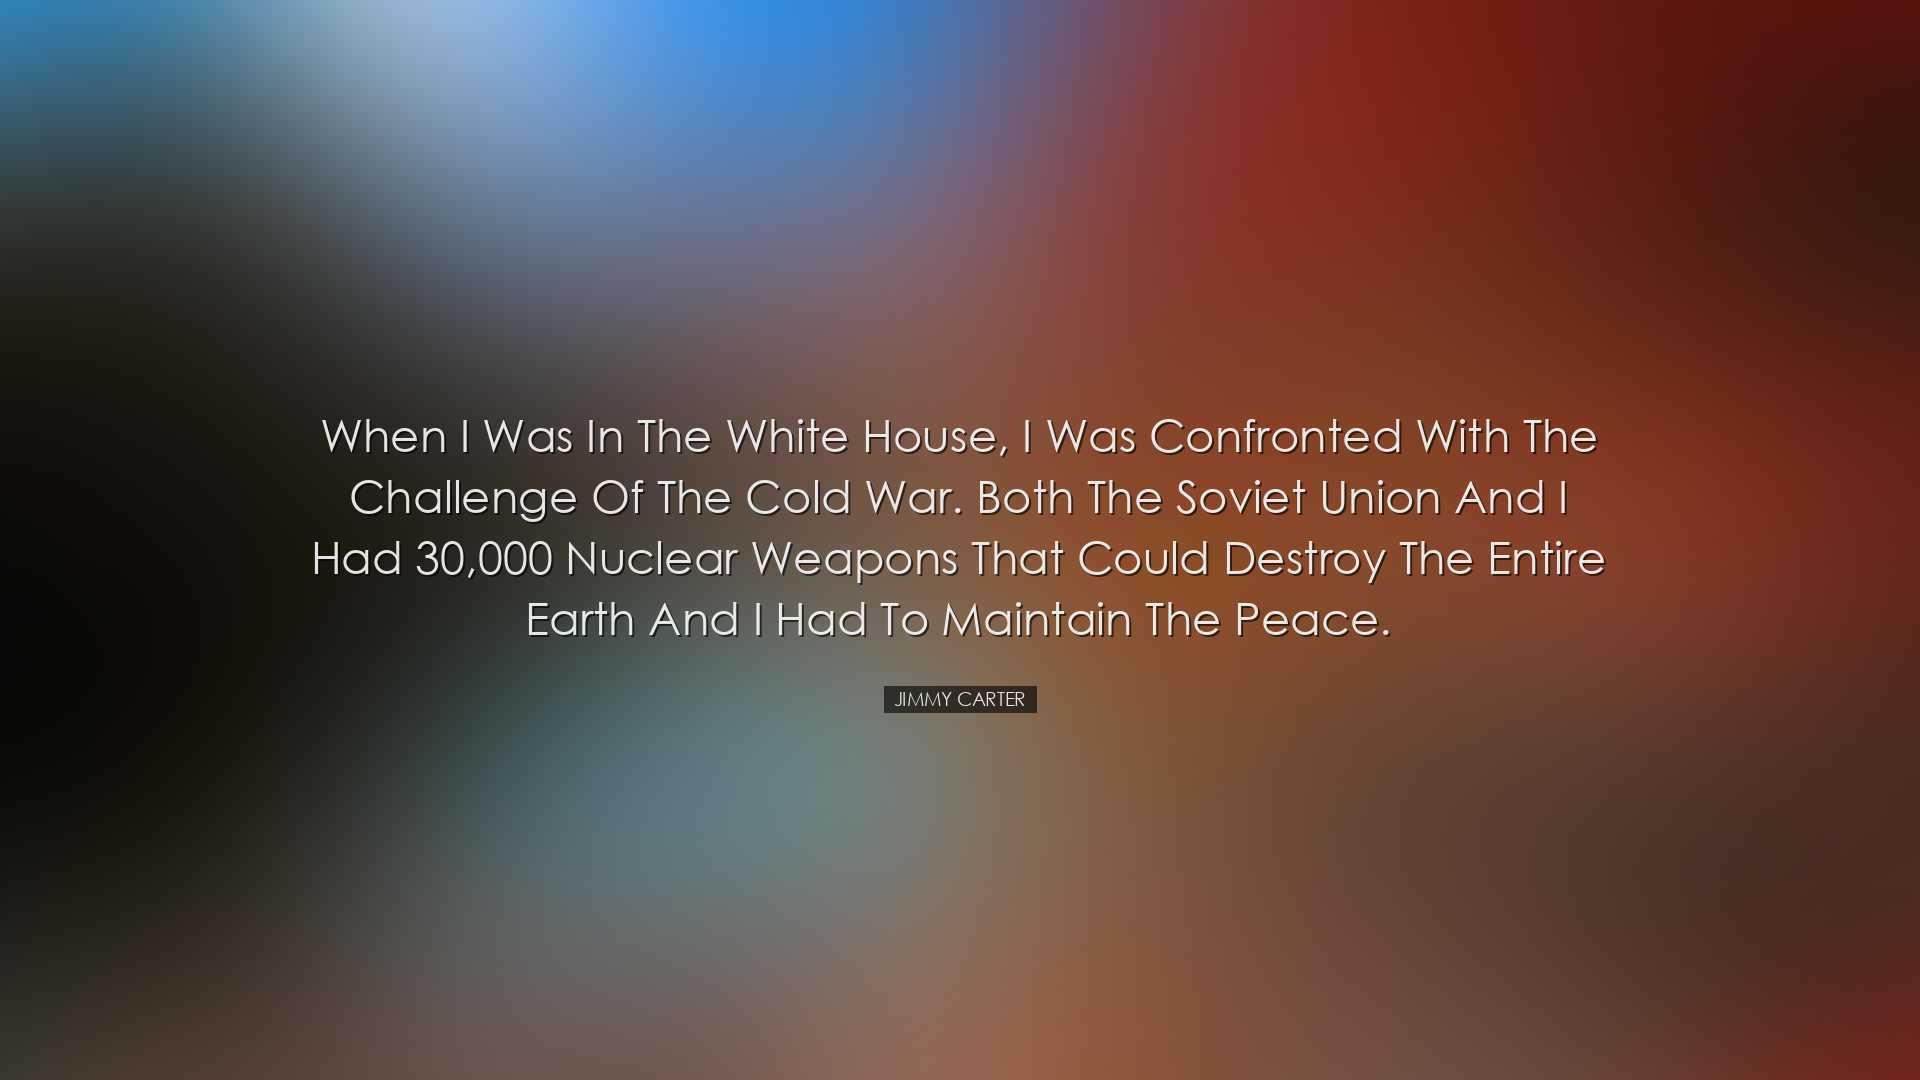 When I was in the White House, I was confronted with the challenge